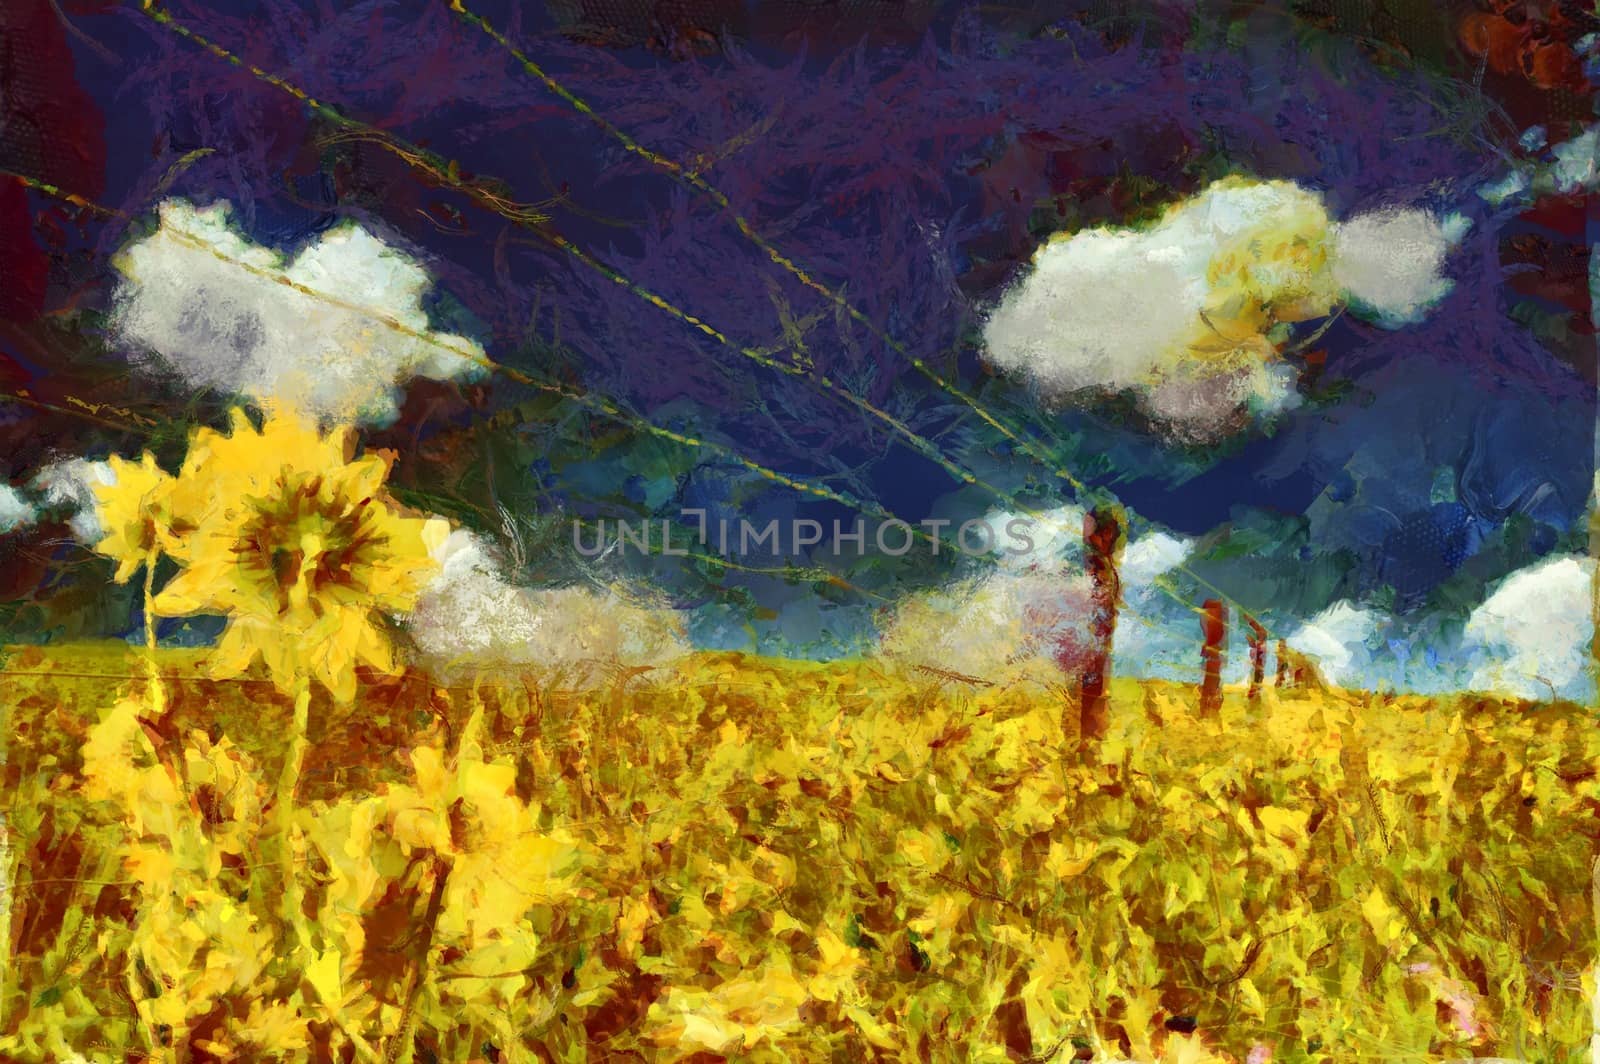 Painting. Sunflowers field. 3D rendering